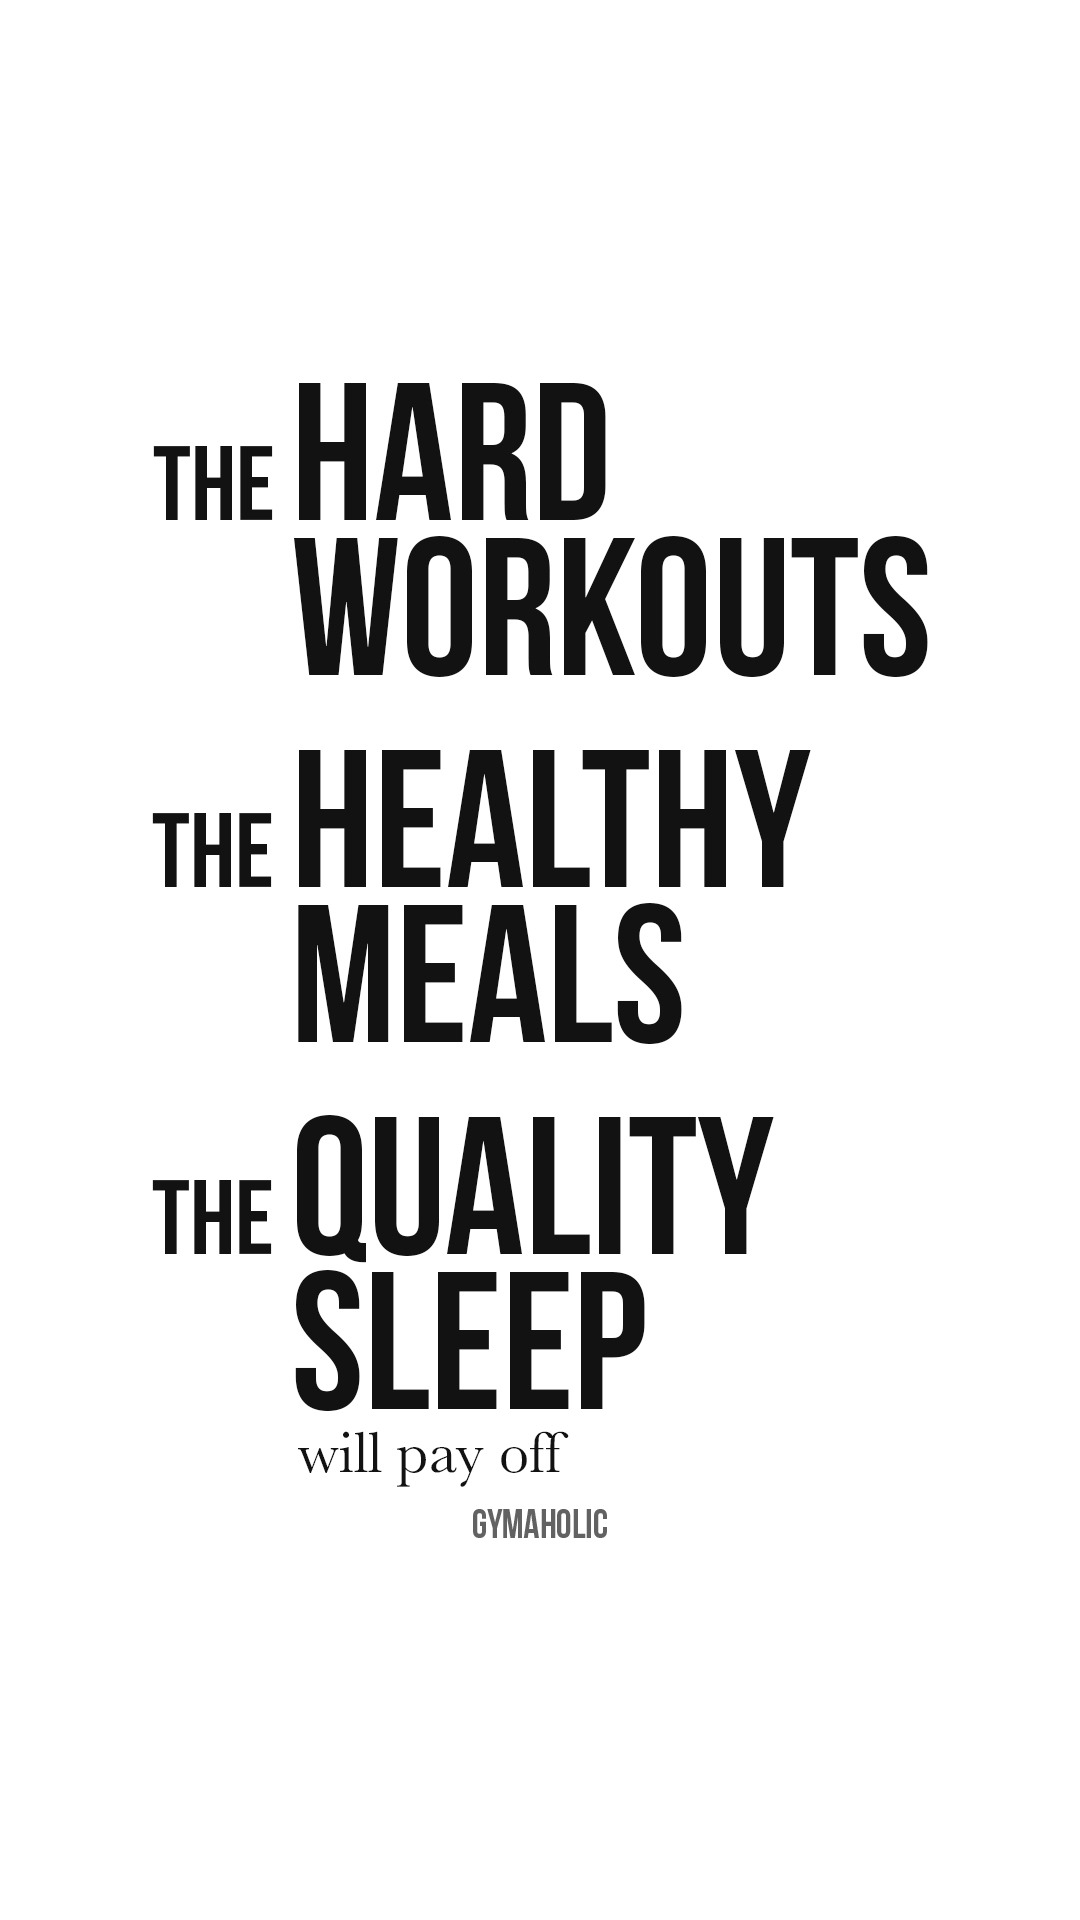 The hard workouts, the healthy meals, the quality sleep